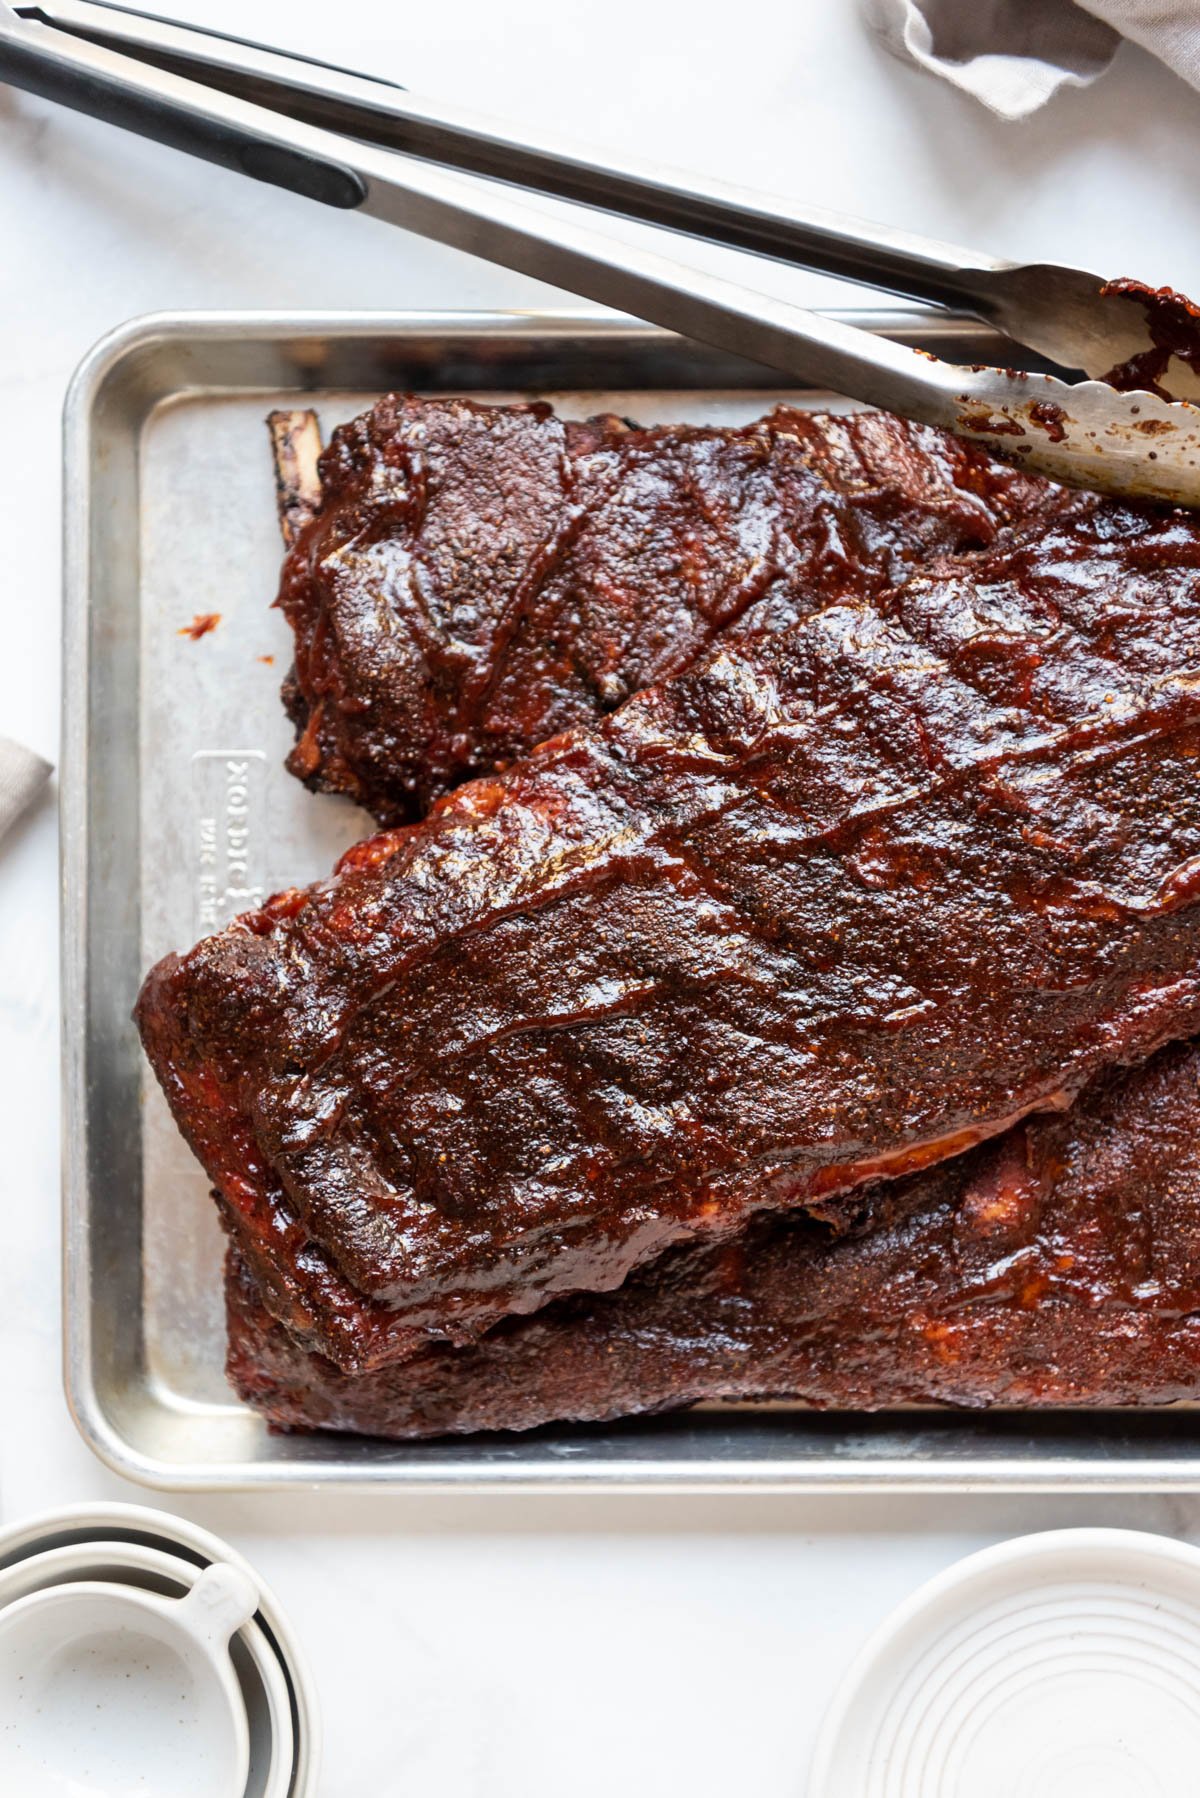 Racks of barbecue ribs on a baking sheet.